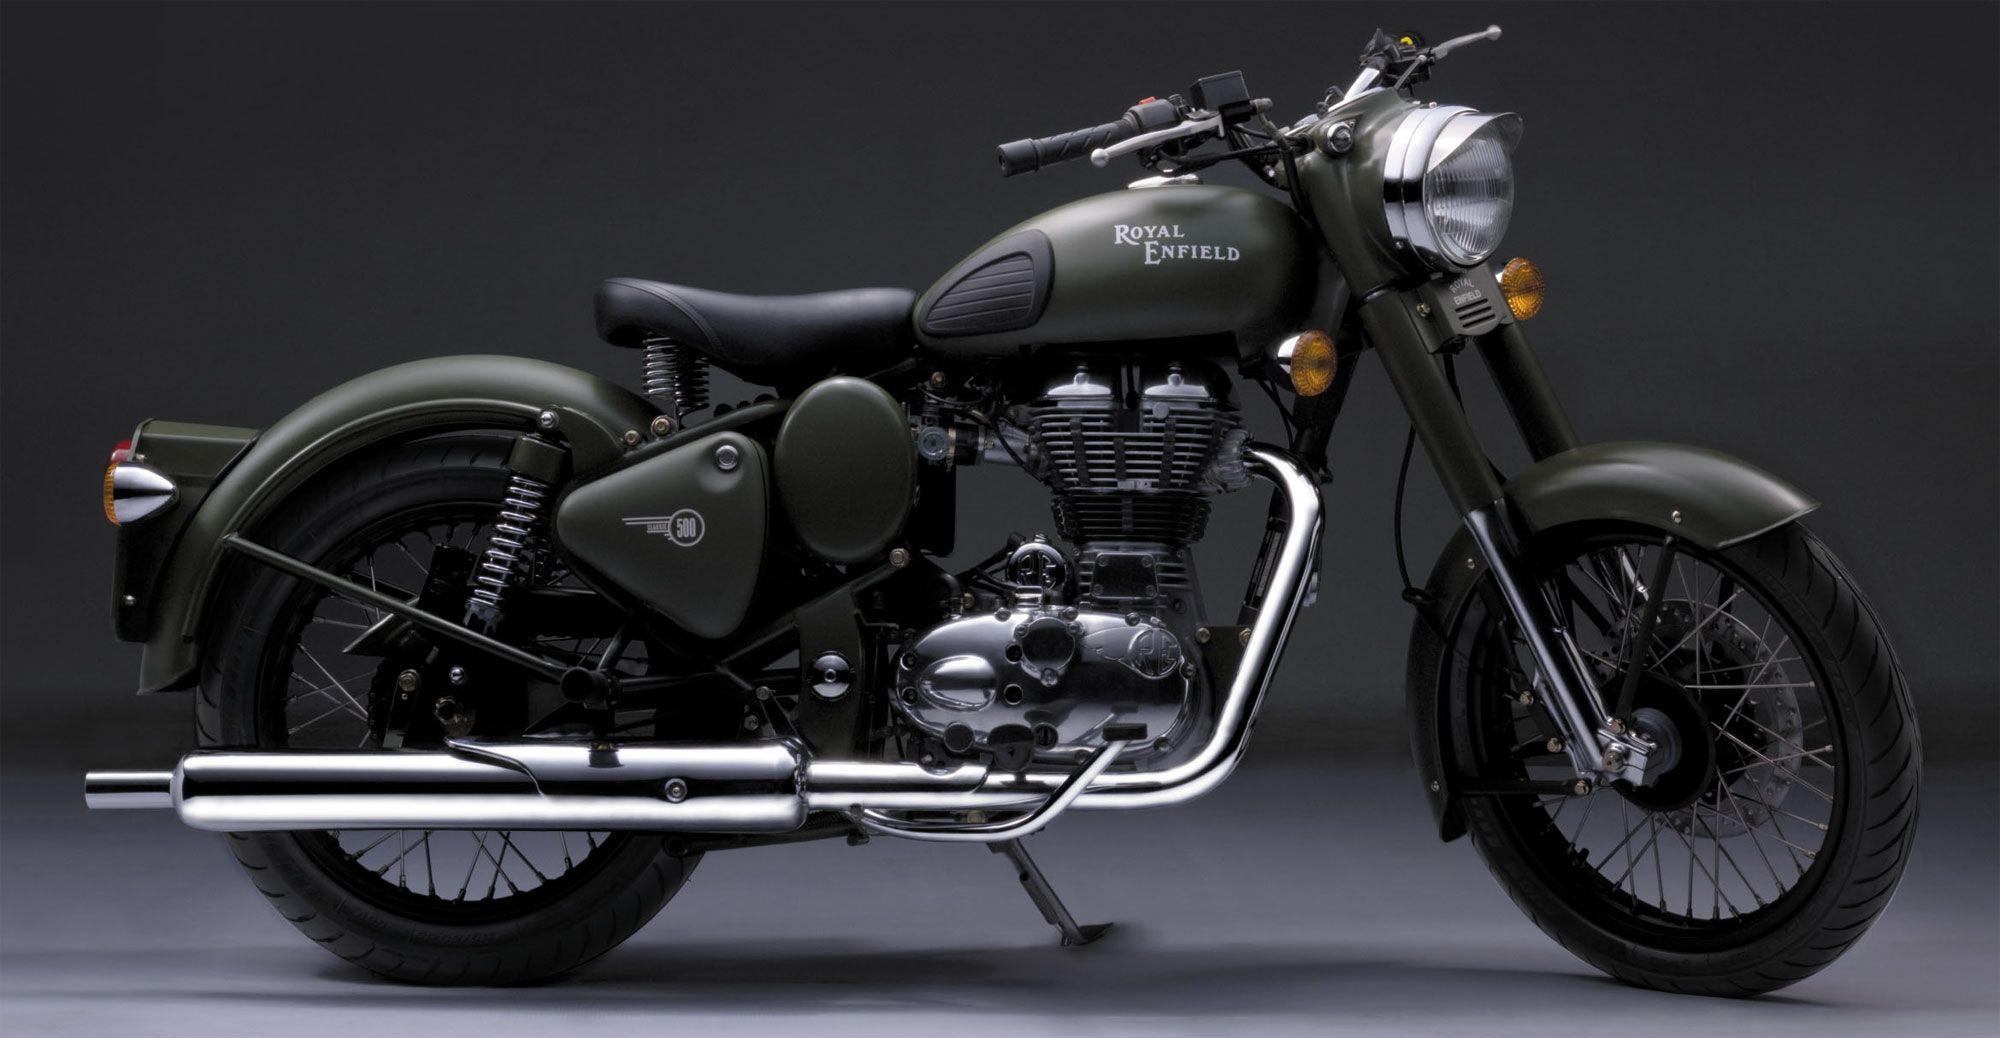 Royal Enfield Bullet C5 Military Picture, Photo, Wallpaper